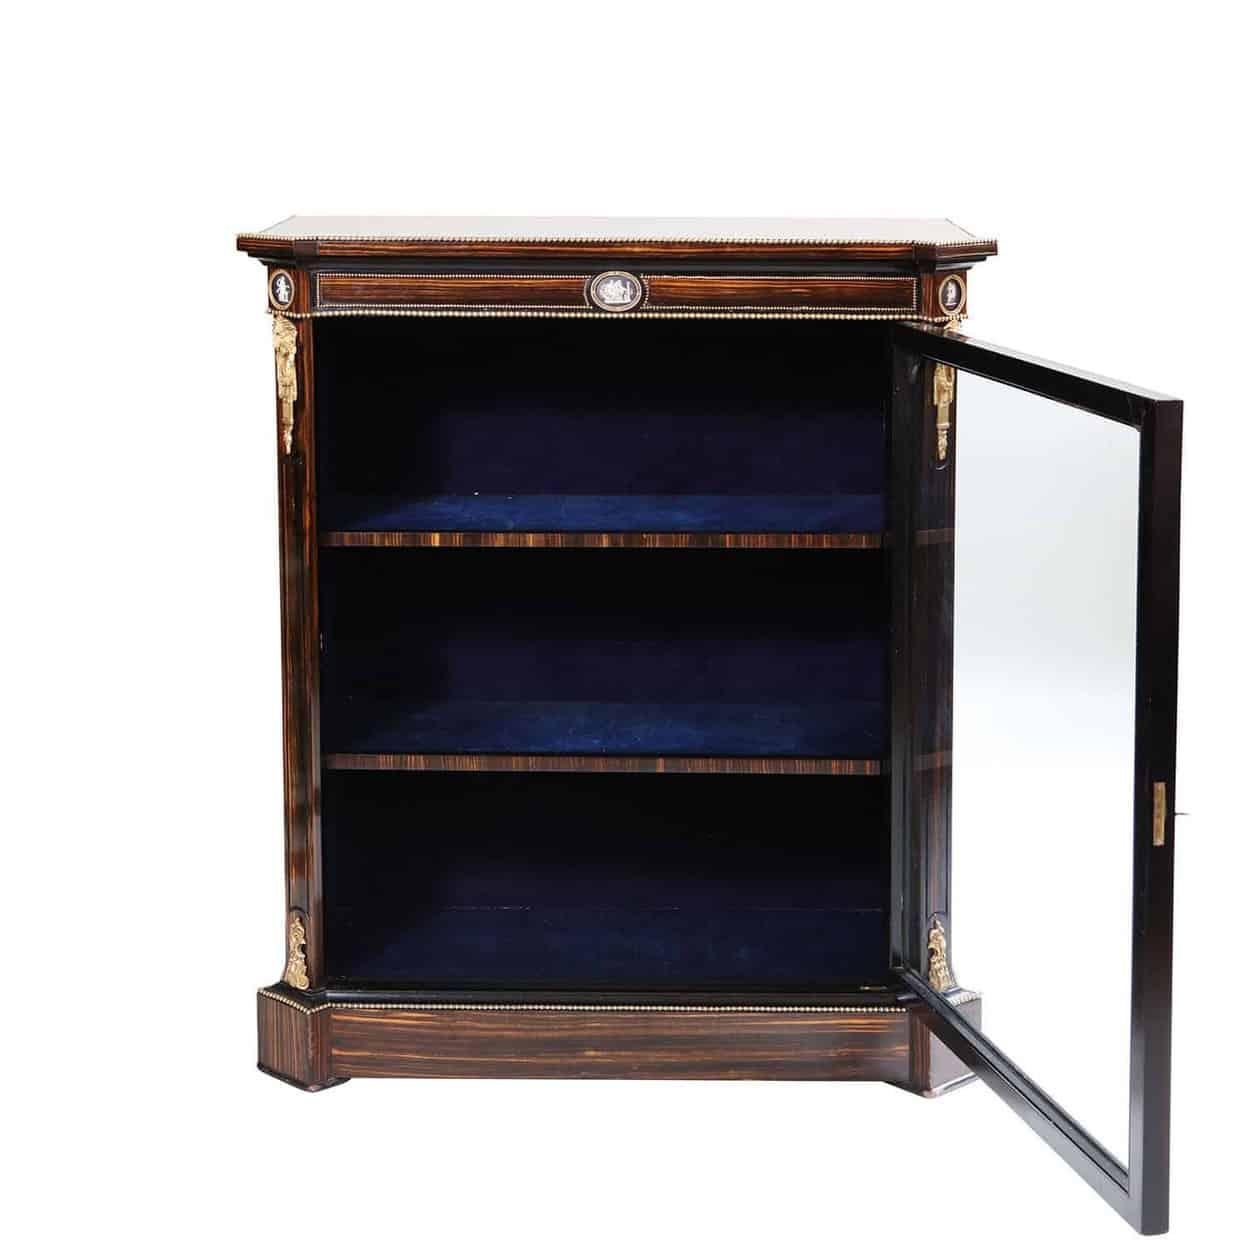 A fine late 19th century calamander wood vitrine cabinet, the top, and front veneered in calamander wood and the sides ebonised, the front and corners of the frieze inset with Pâte-sur-pâte plaques within gilt borders, the corners with classical